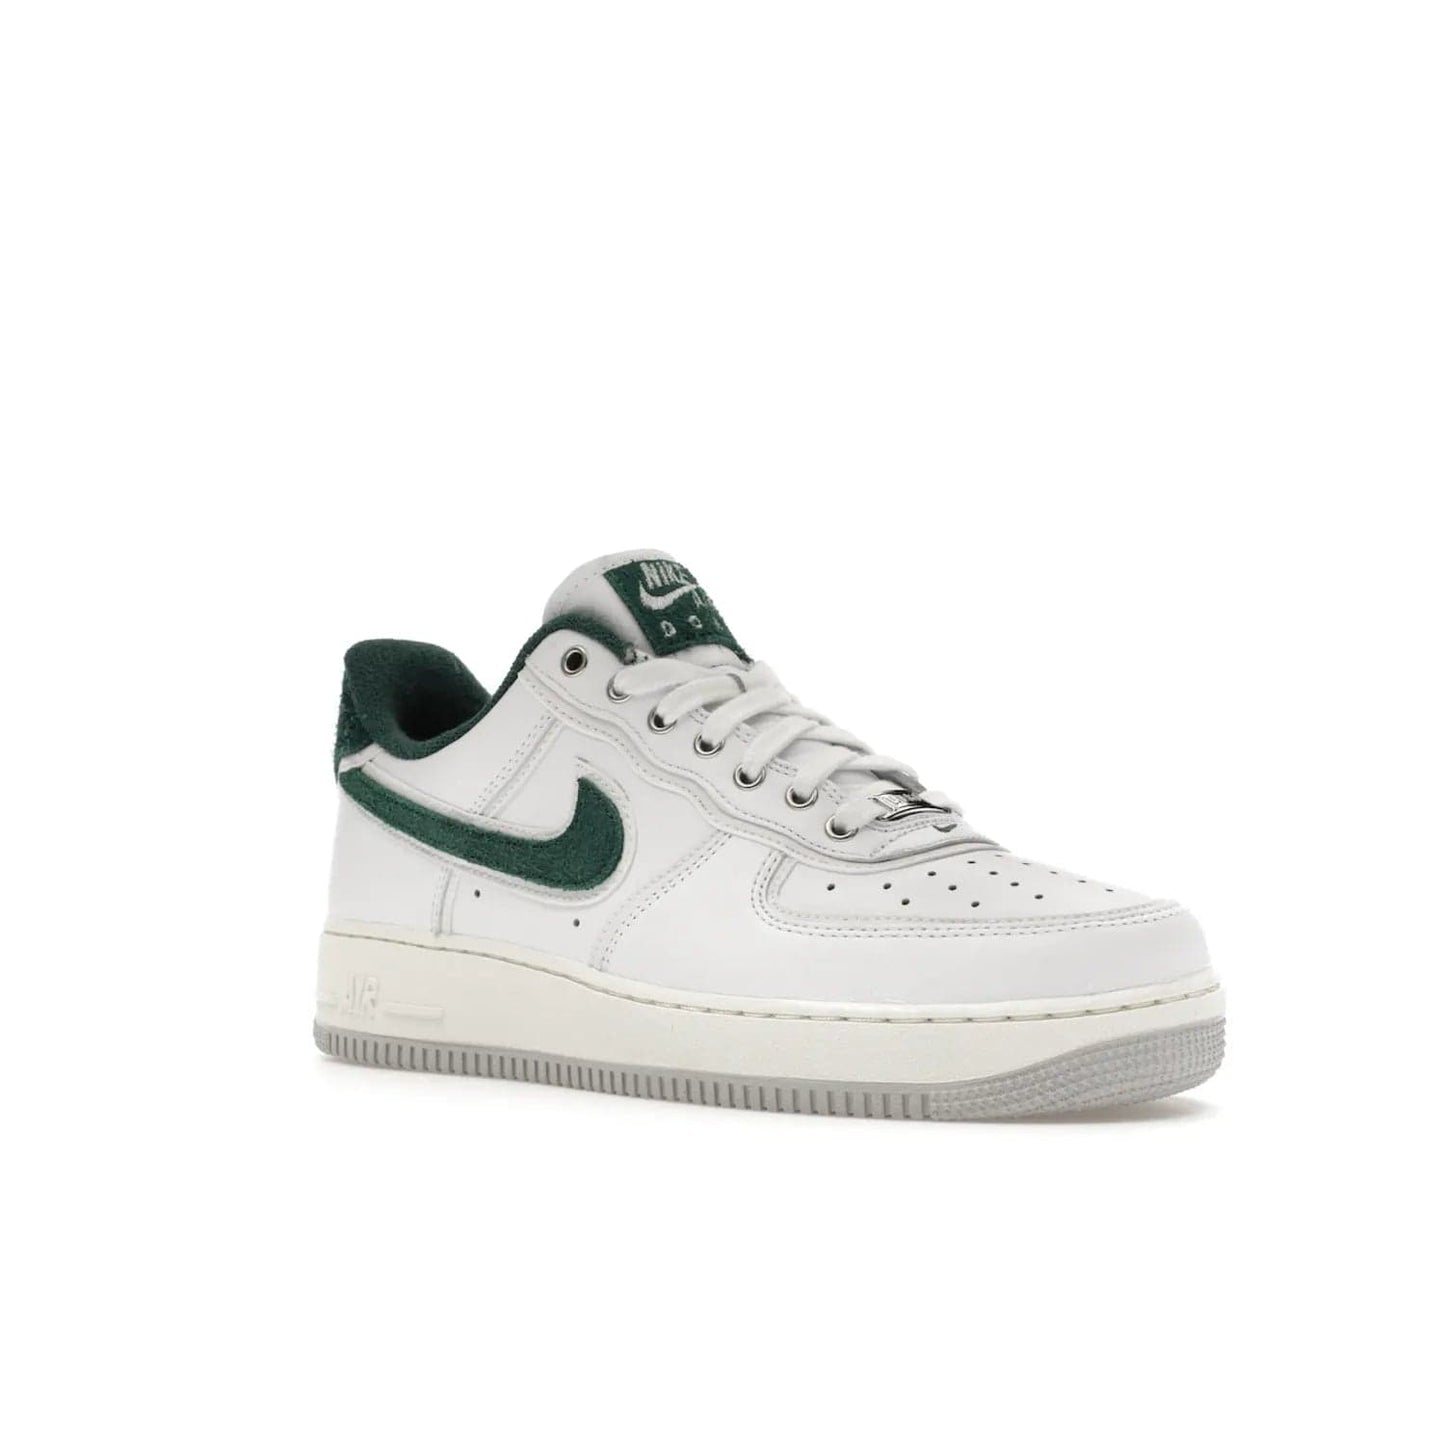 Nike Air Force 1 Low '07 Premium University of Oregon PE - Image 5 - Only at www.BallersClubKickz.com - The Nike Air Force 1 Low '07 Premium. Special Oregon University colorway. White base with green and sail accents. Cushioned rubber midsole. Comfort and style. Support your school!